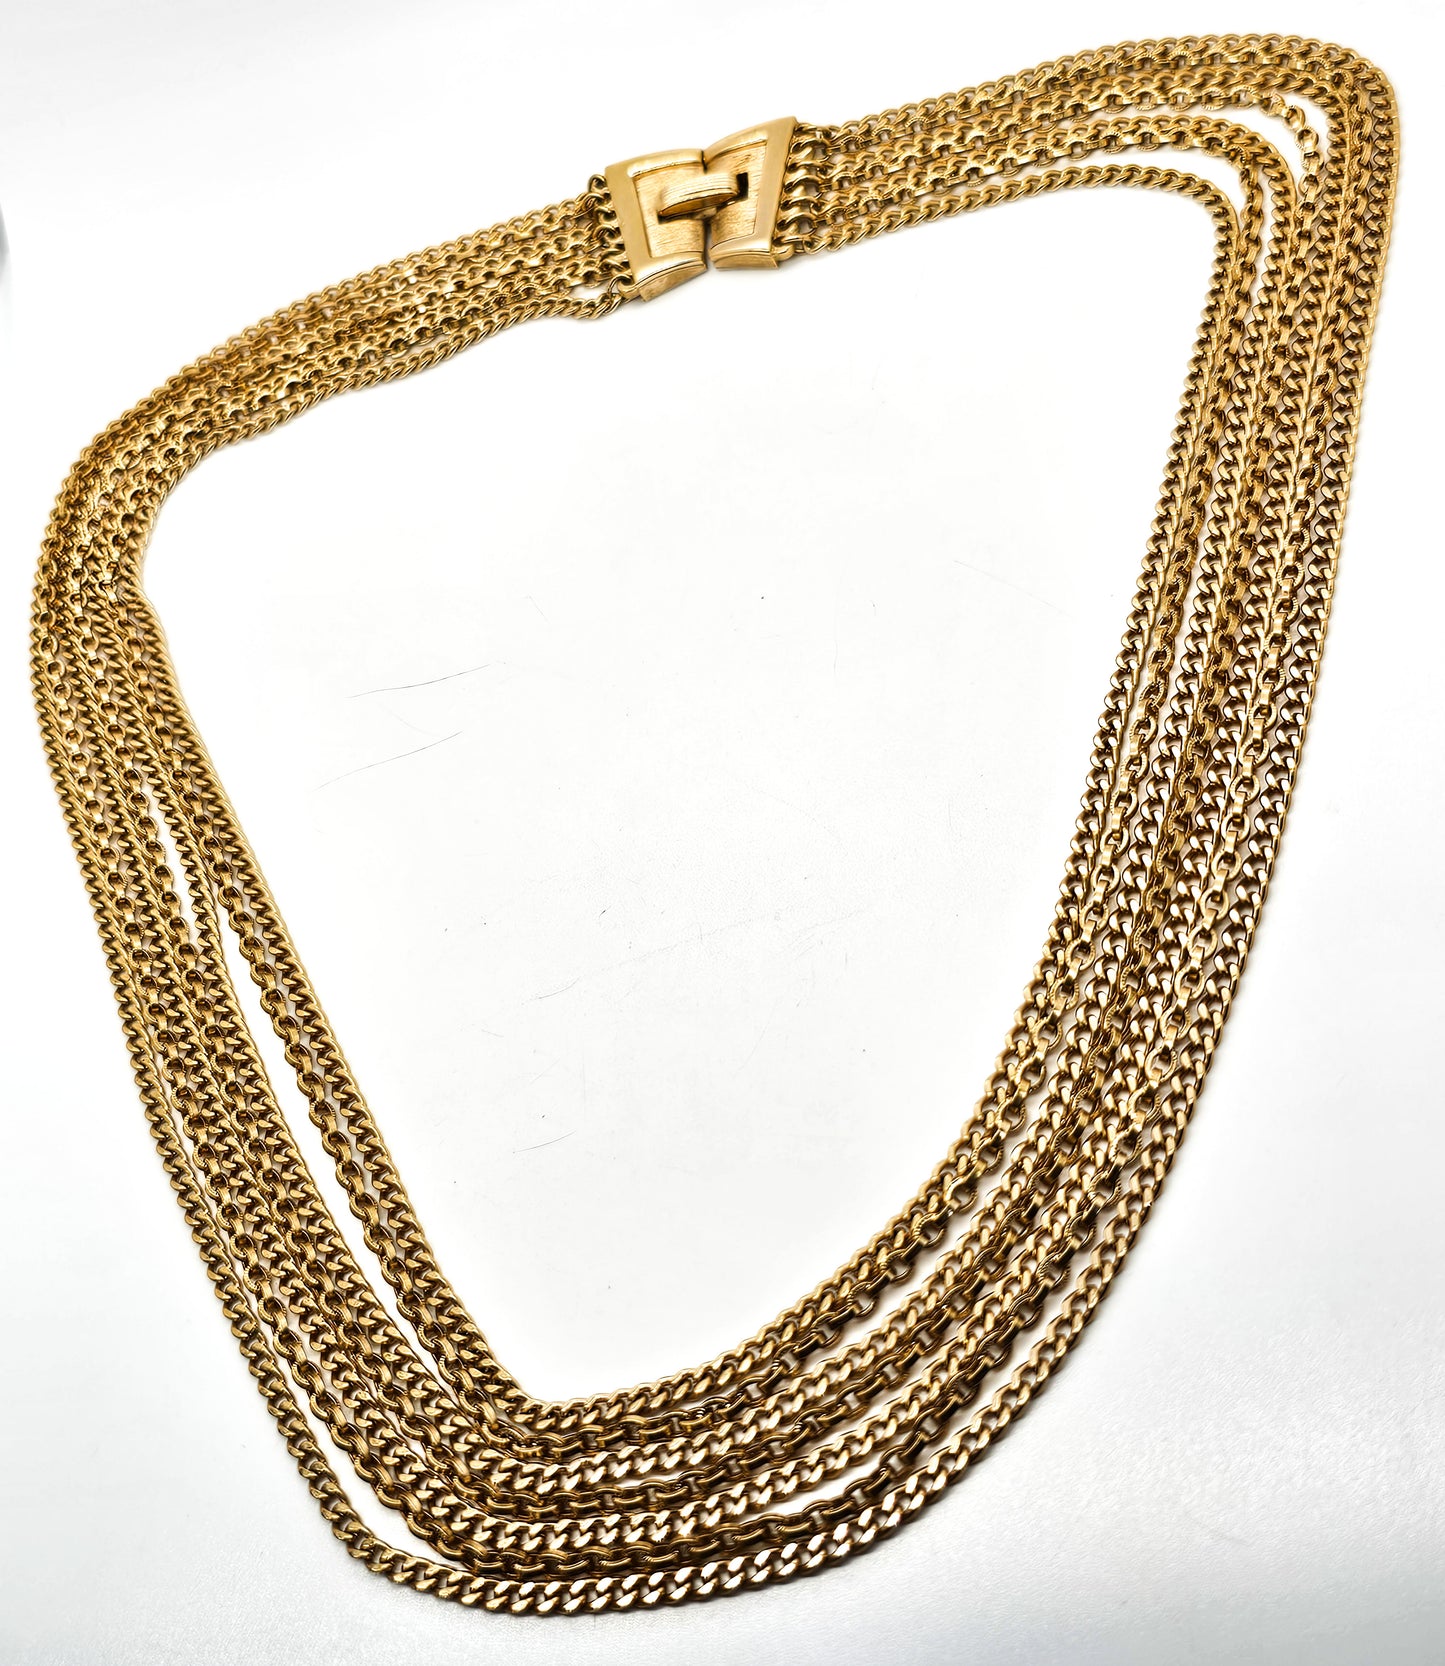 Crown Trifari gold toned 7 layer vintage chain necklace with fold over clasp